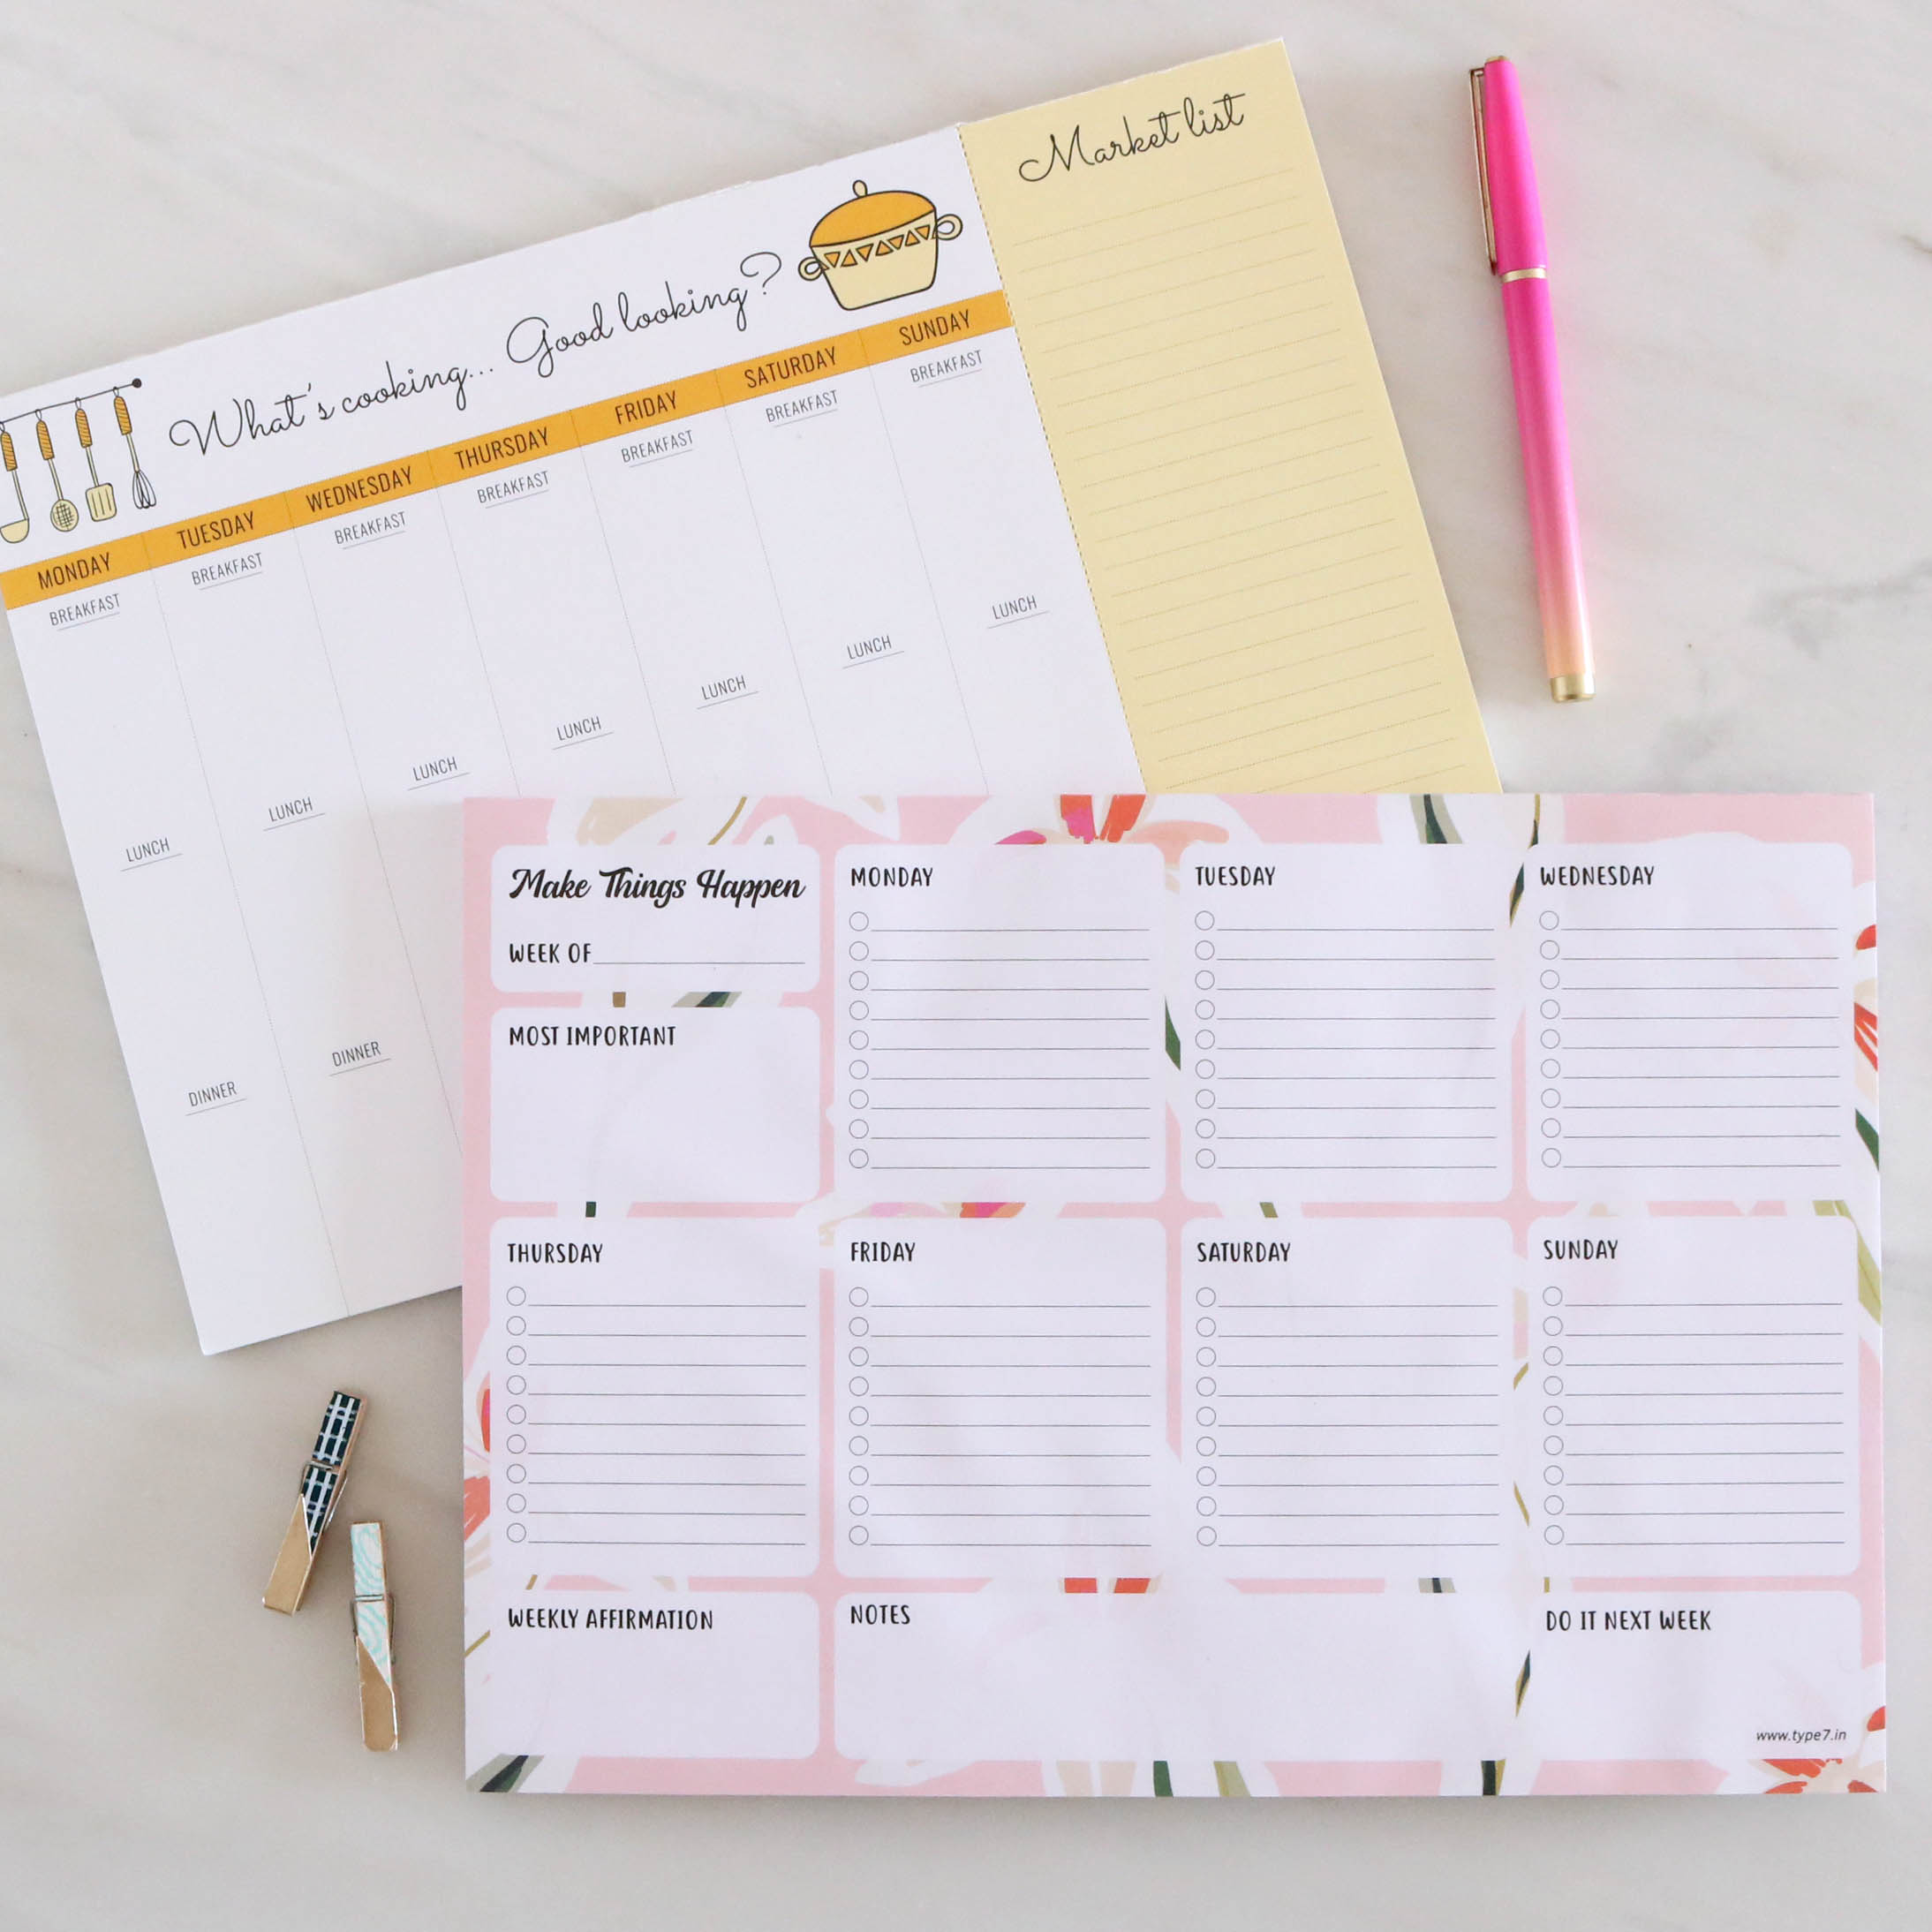 Set of 2 Weekly Planners - Make Things Happen & What's Cooking